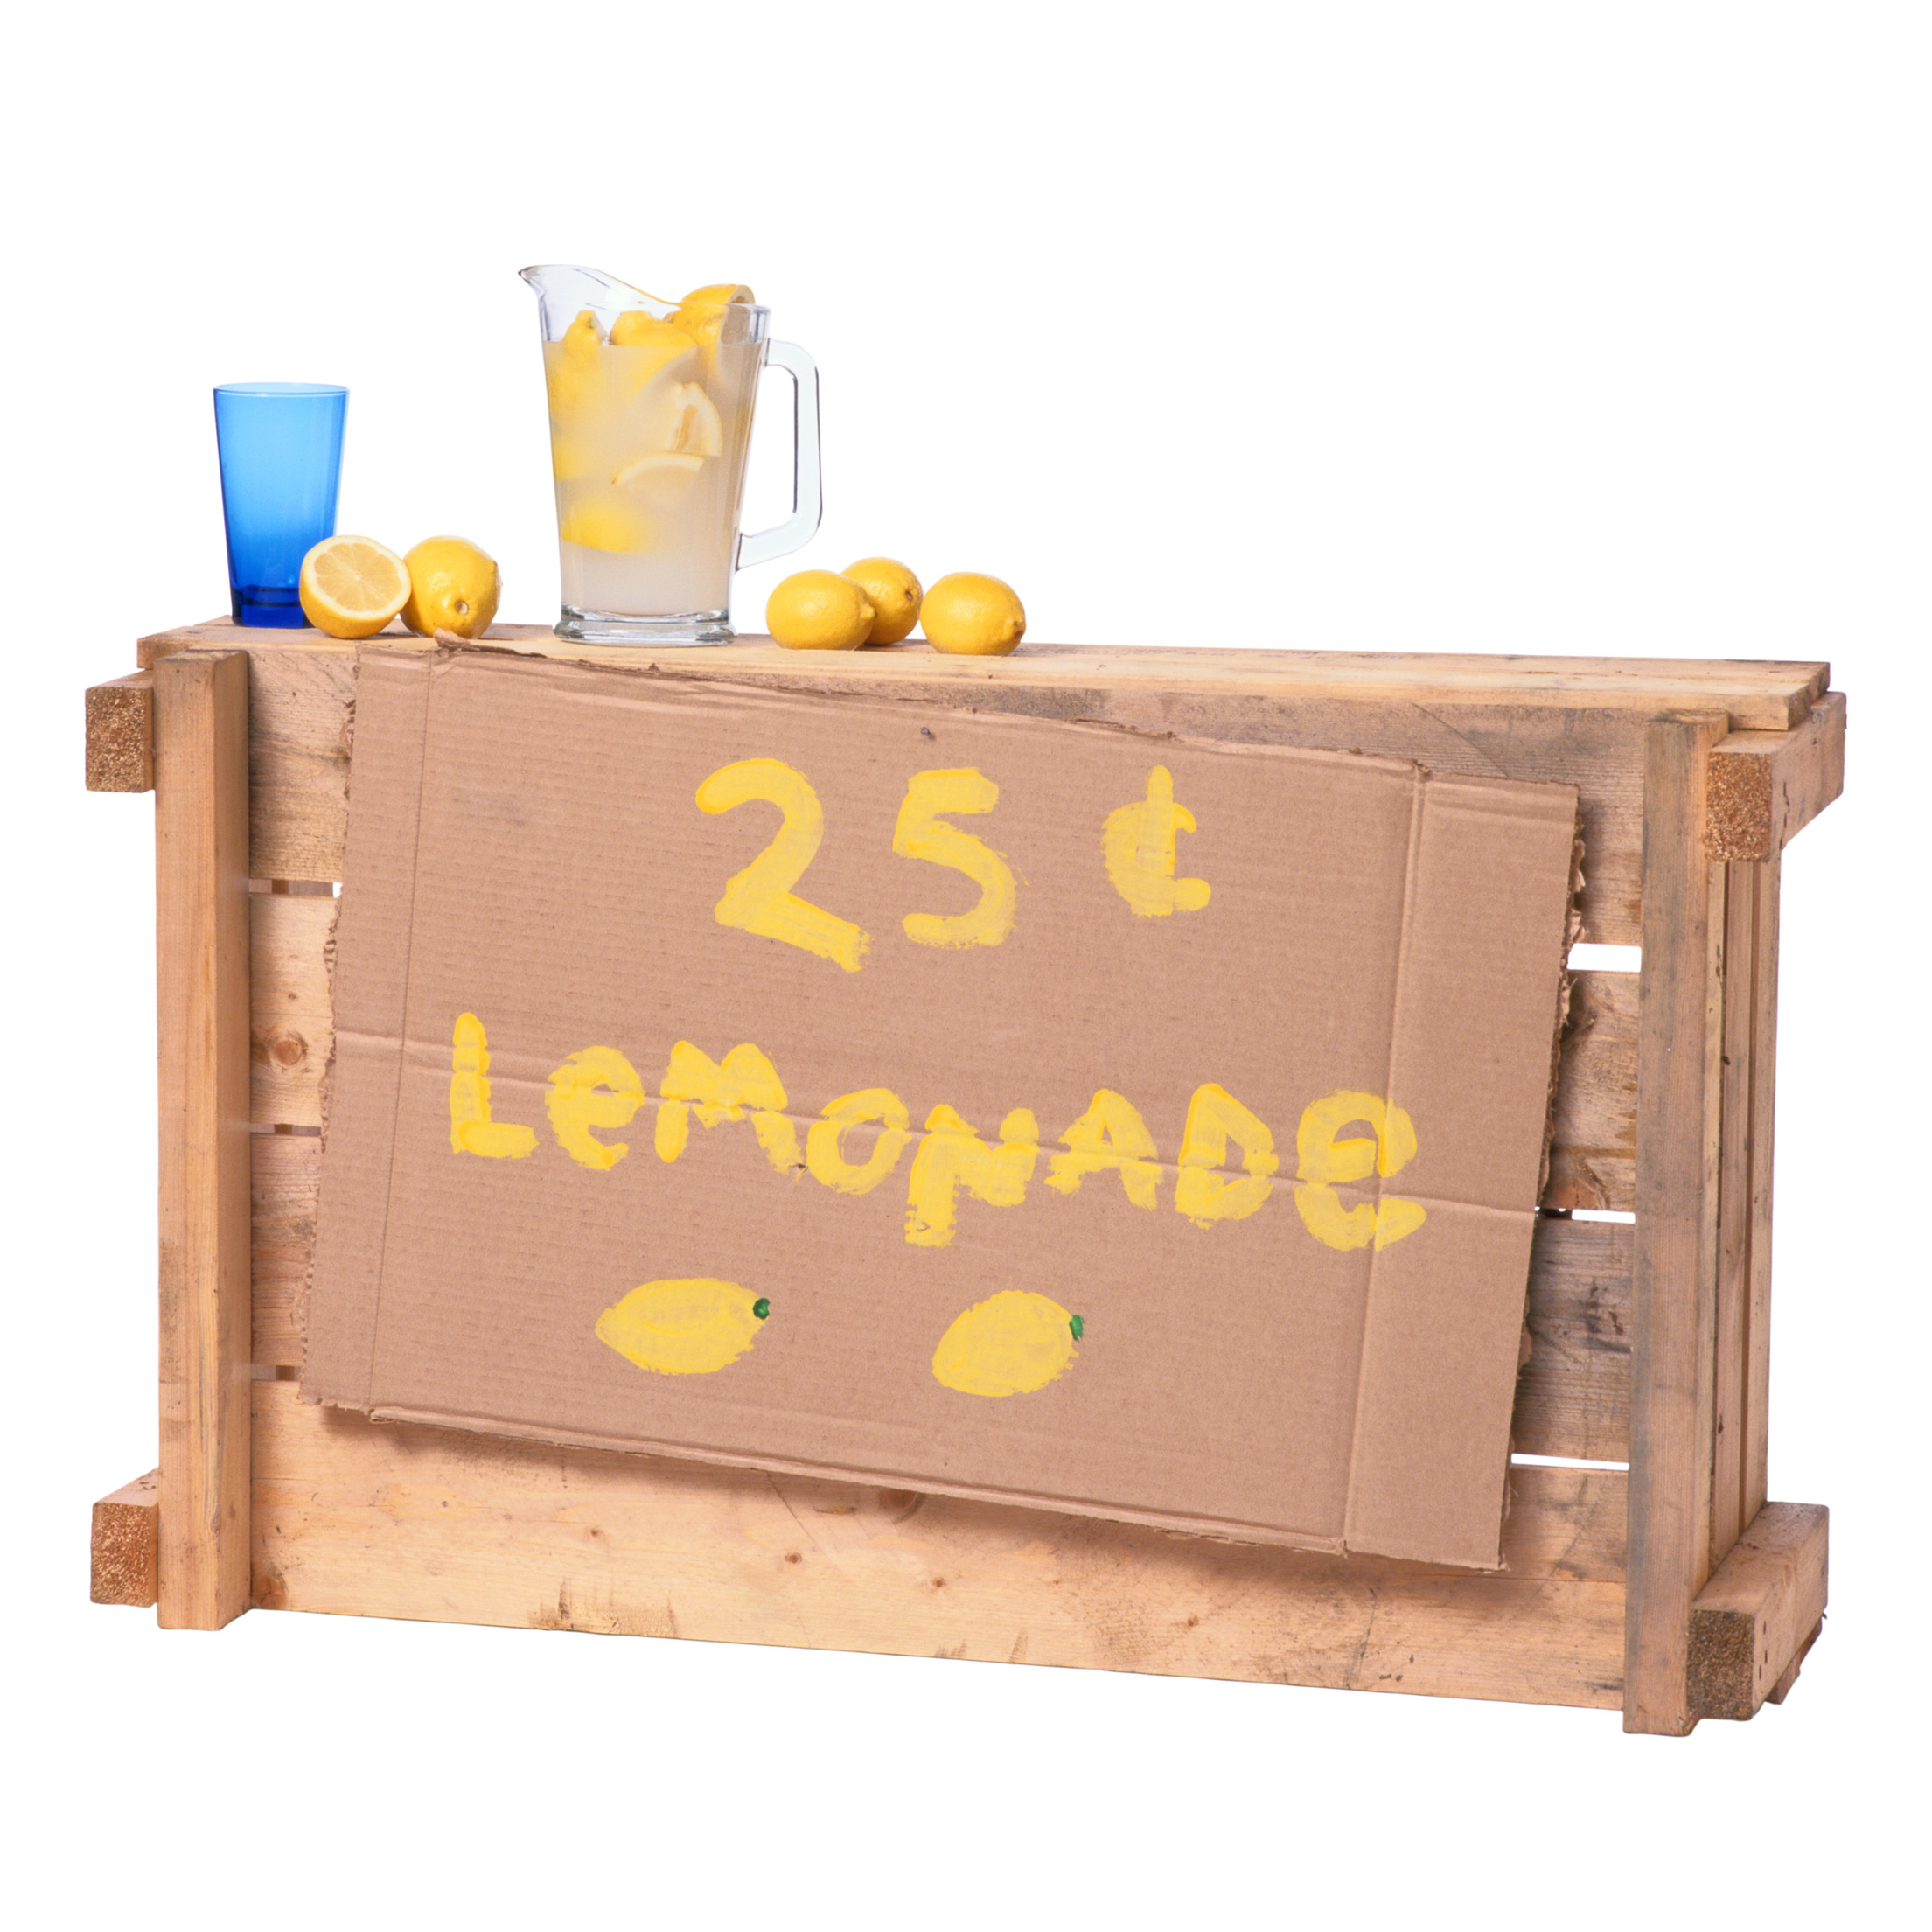 7 Helpful Lessons Learned From A Lemonade Stand